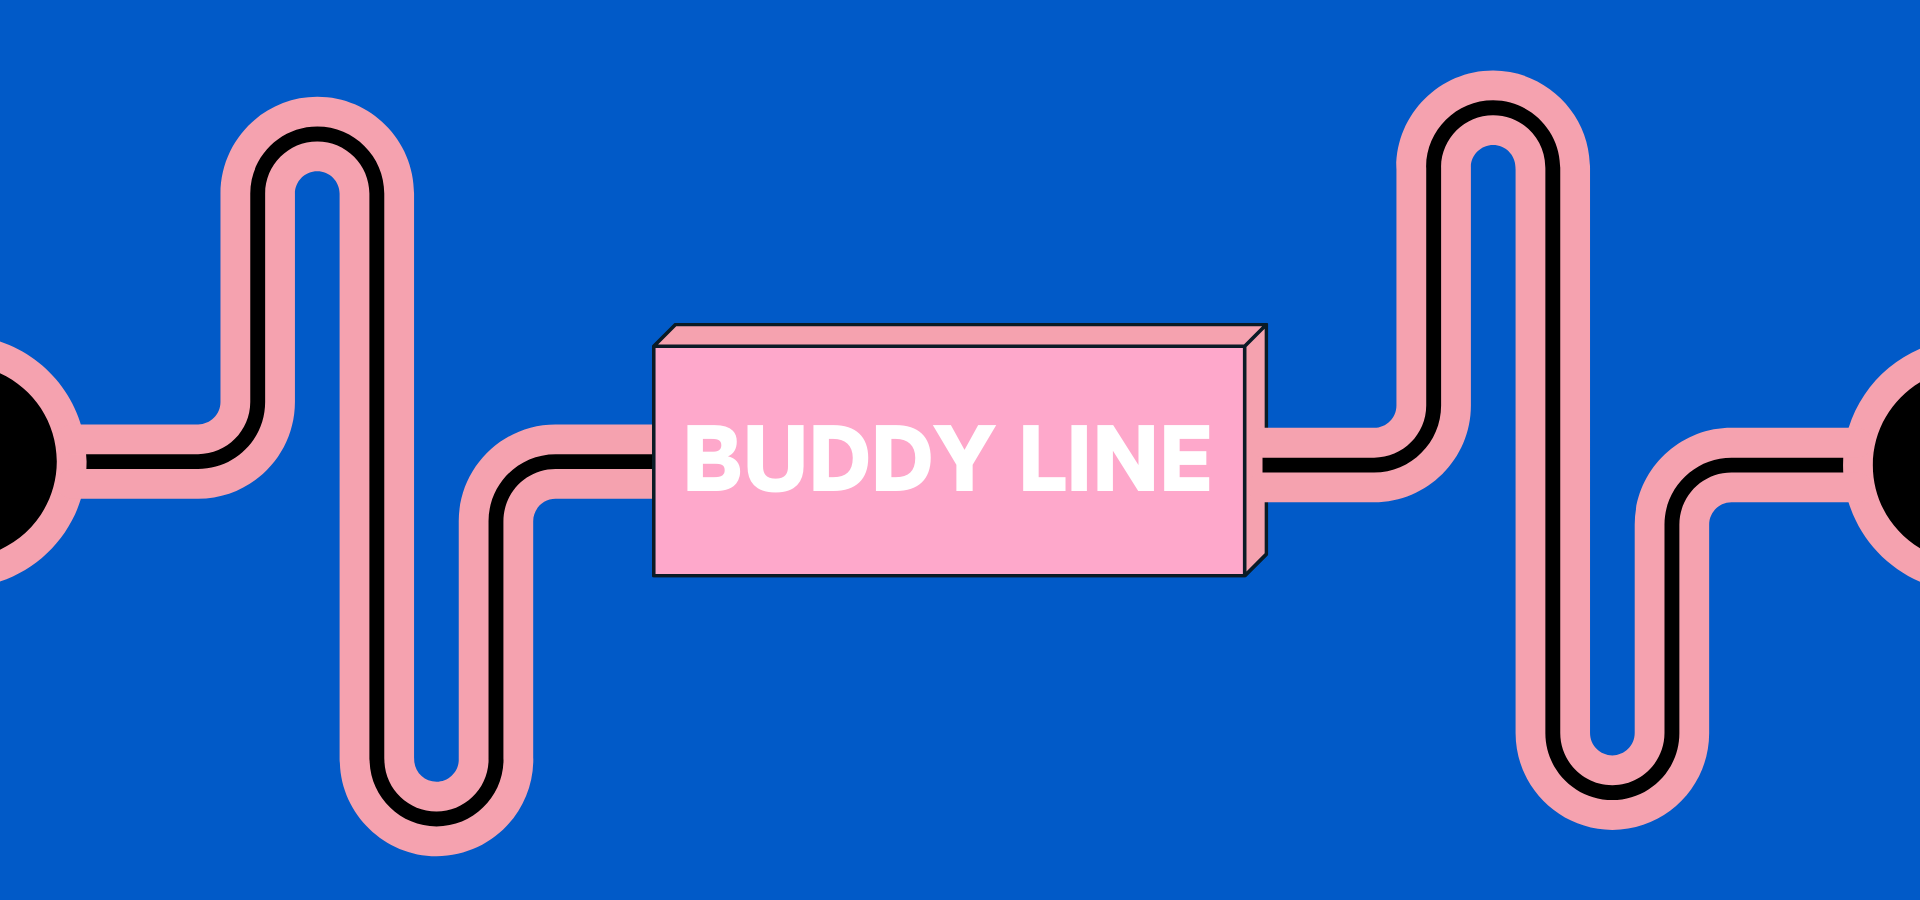 Buddy Line (featured image)